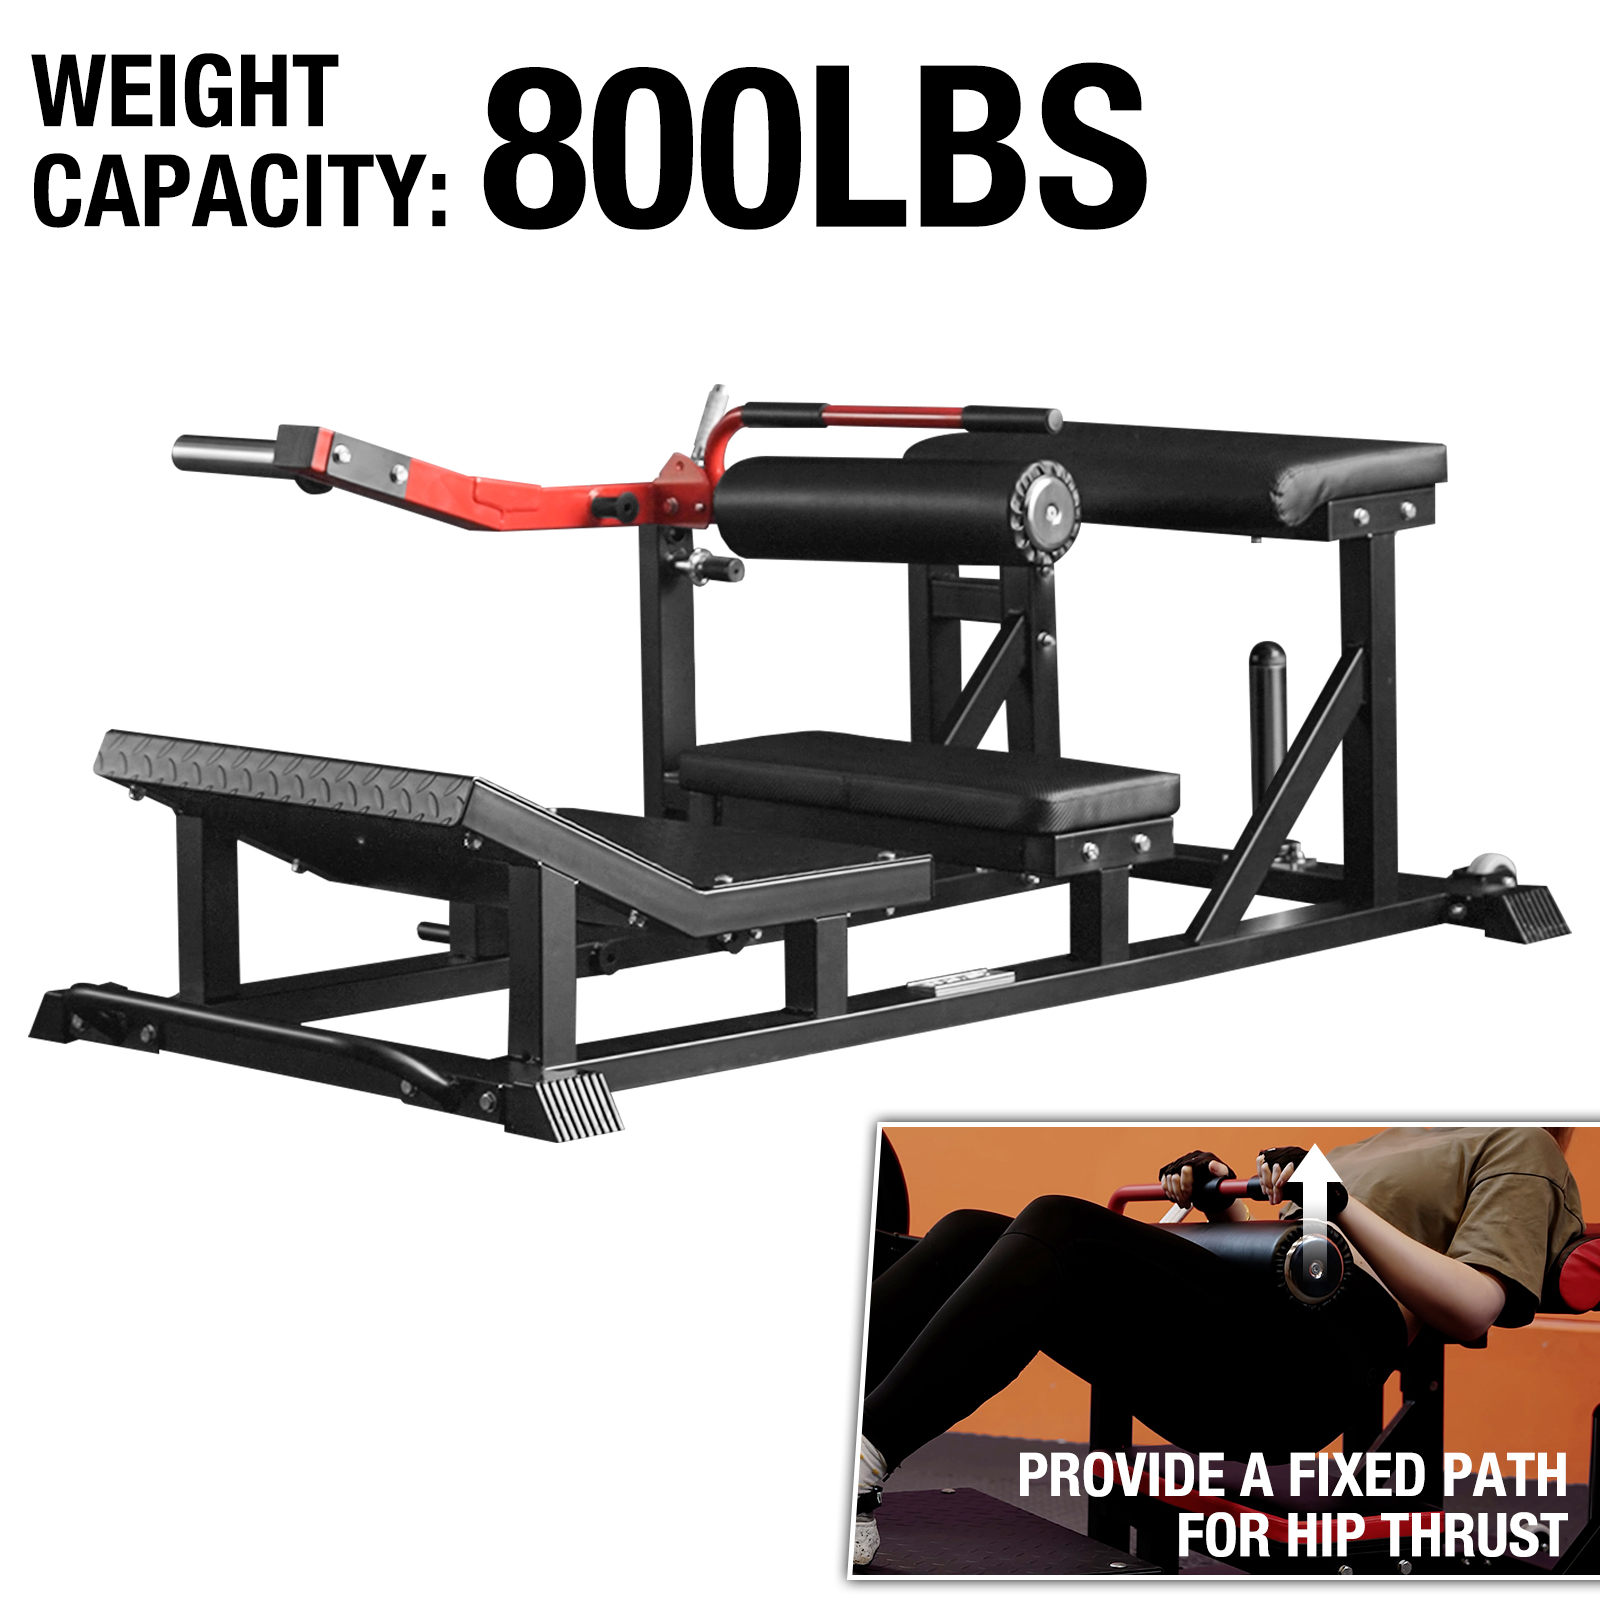 syedee Glute Bridge Machine, Heavy Duty Plate-Loaded Hip Thrust Machine, Glute Drive Machine for Glute Muscles Shaping(Red), Home Gym Equipment - image 1 of 10